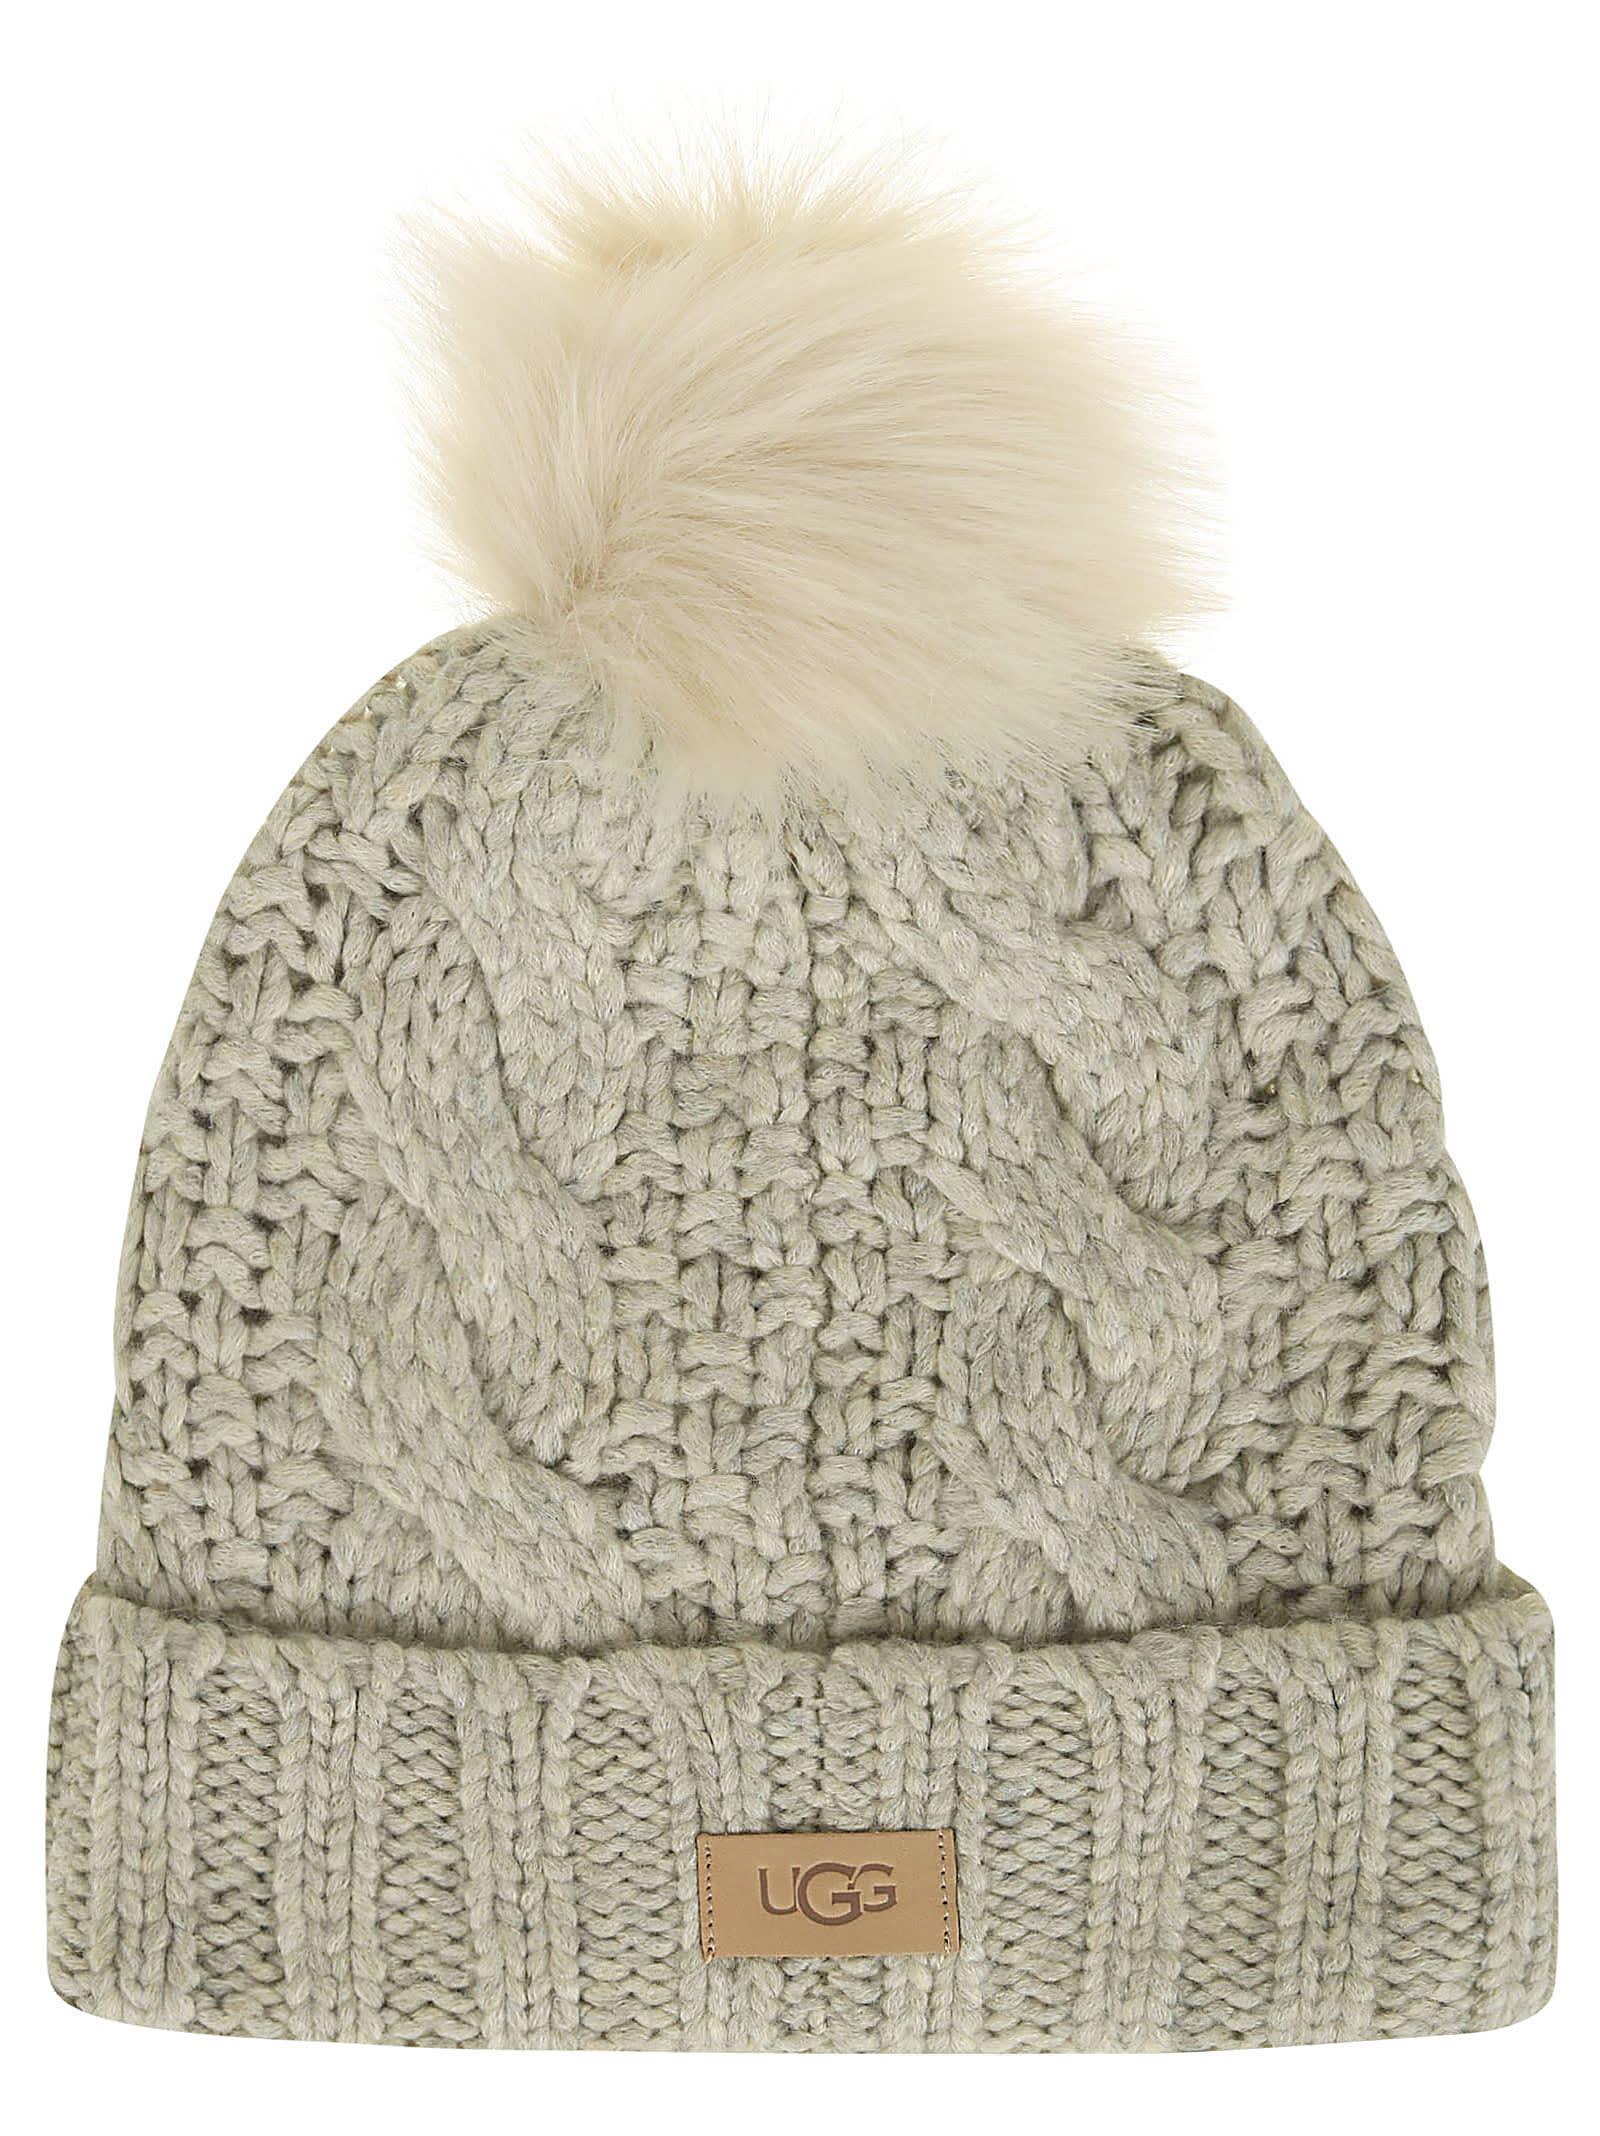 UGG W Knit Cable Hat W F Fur Pom Light Grey in Natural | Lyst